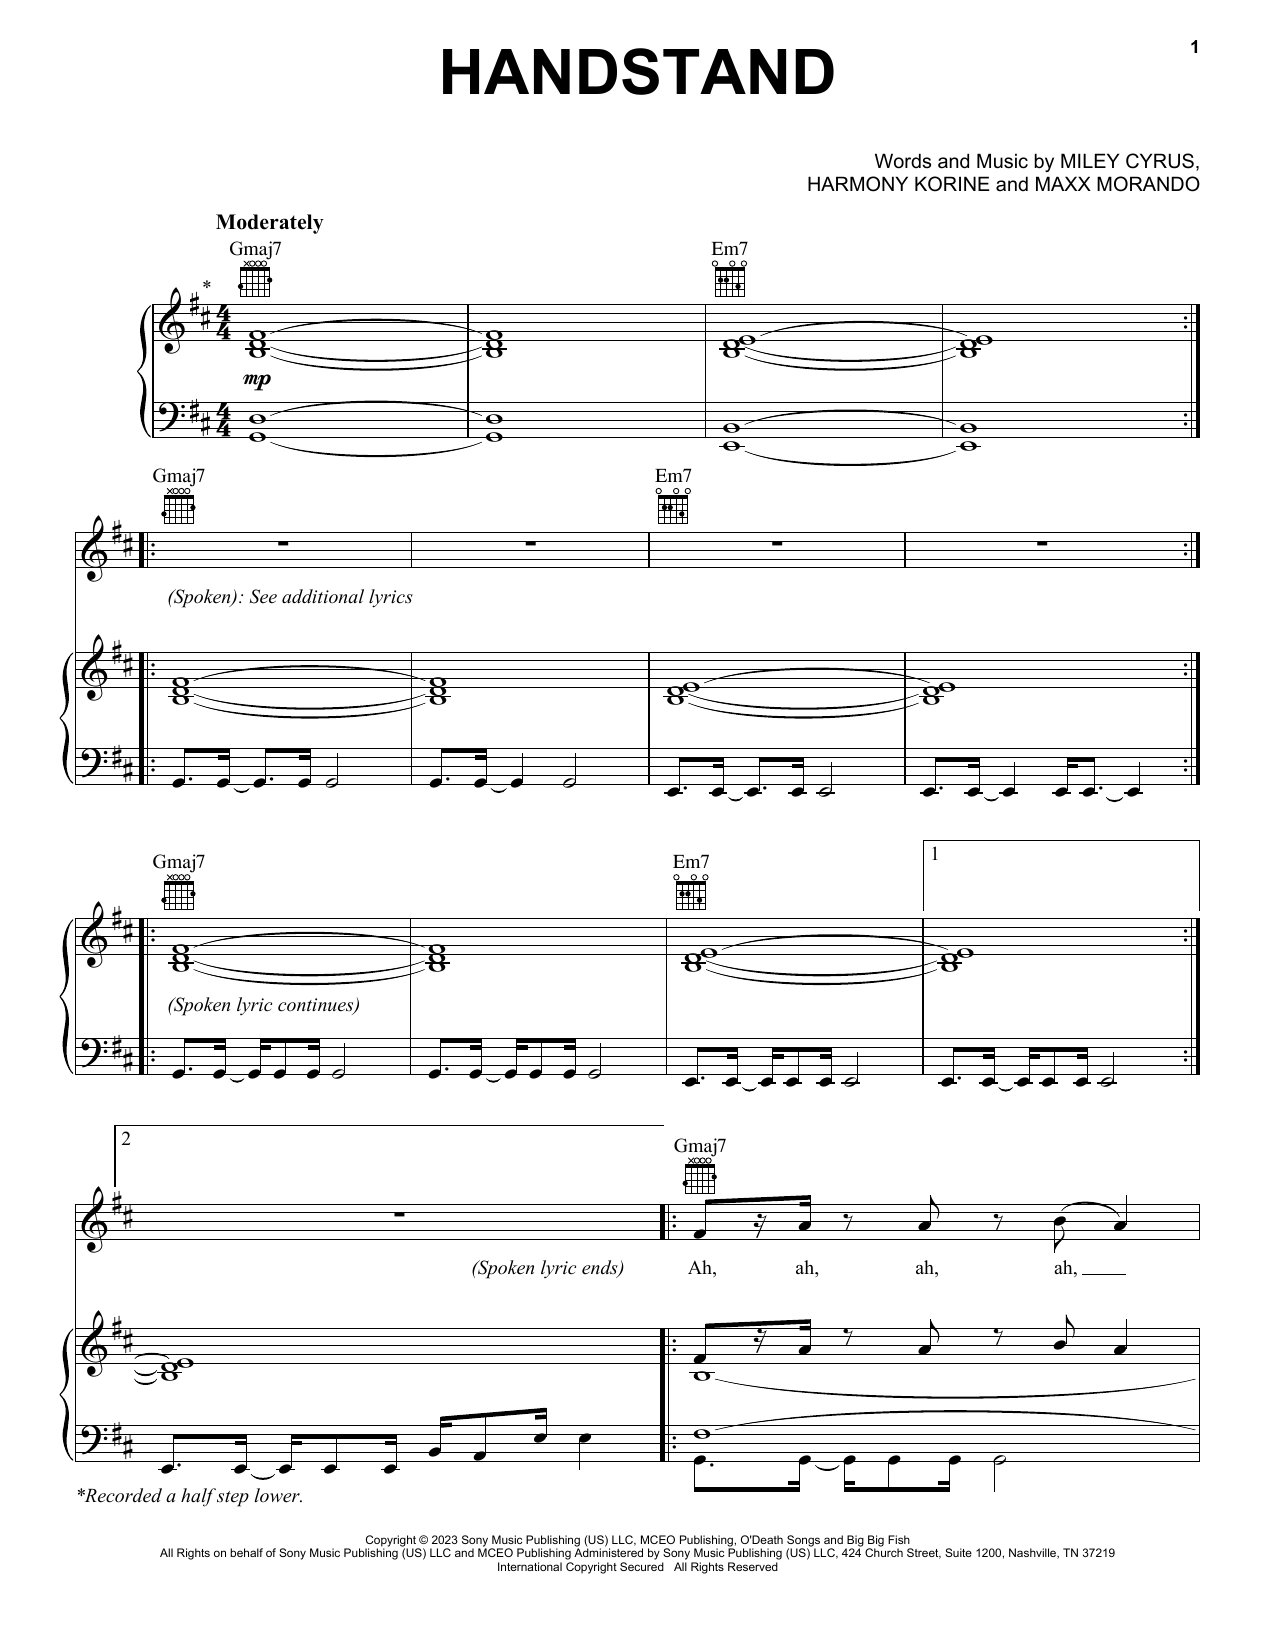 Miley Cyrus Handstand sheet music notes printable PDF score